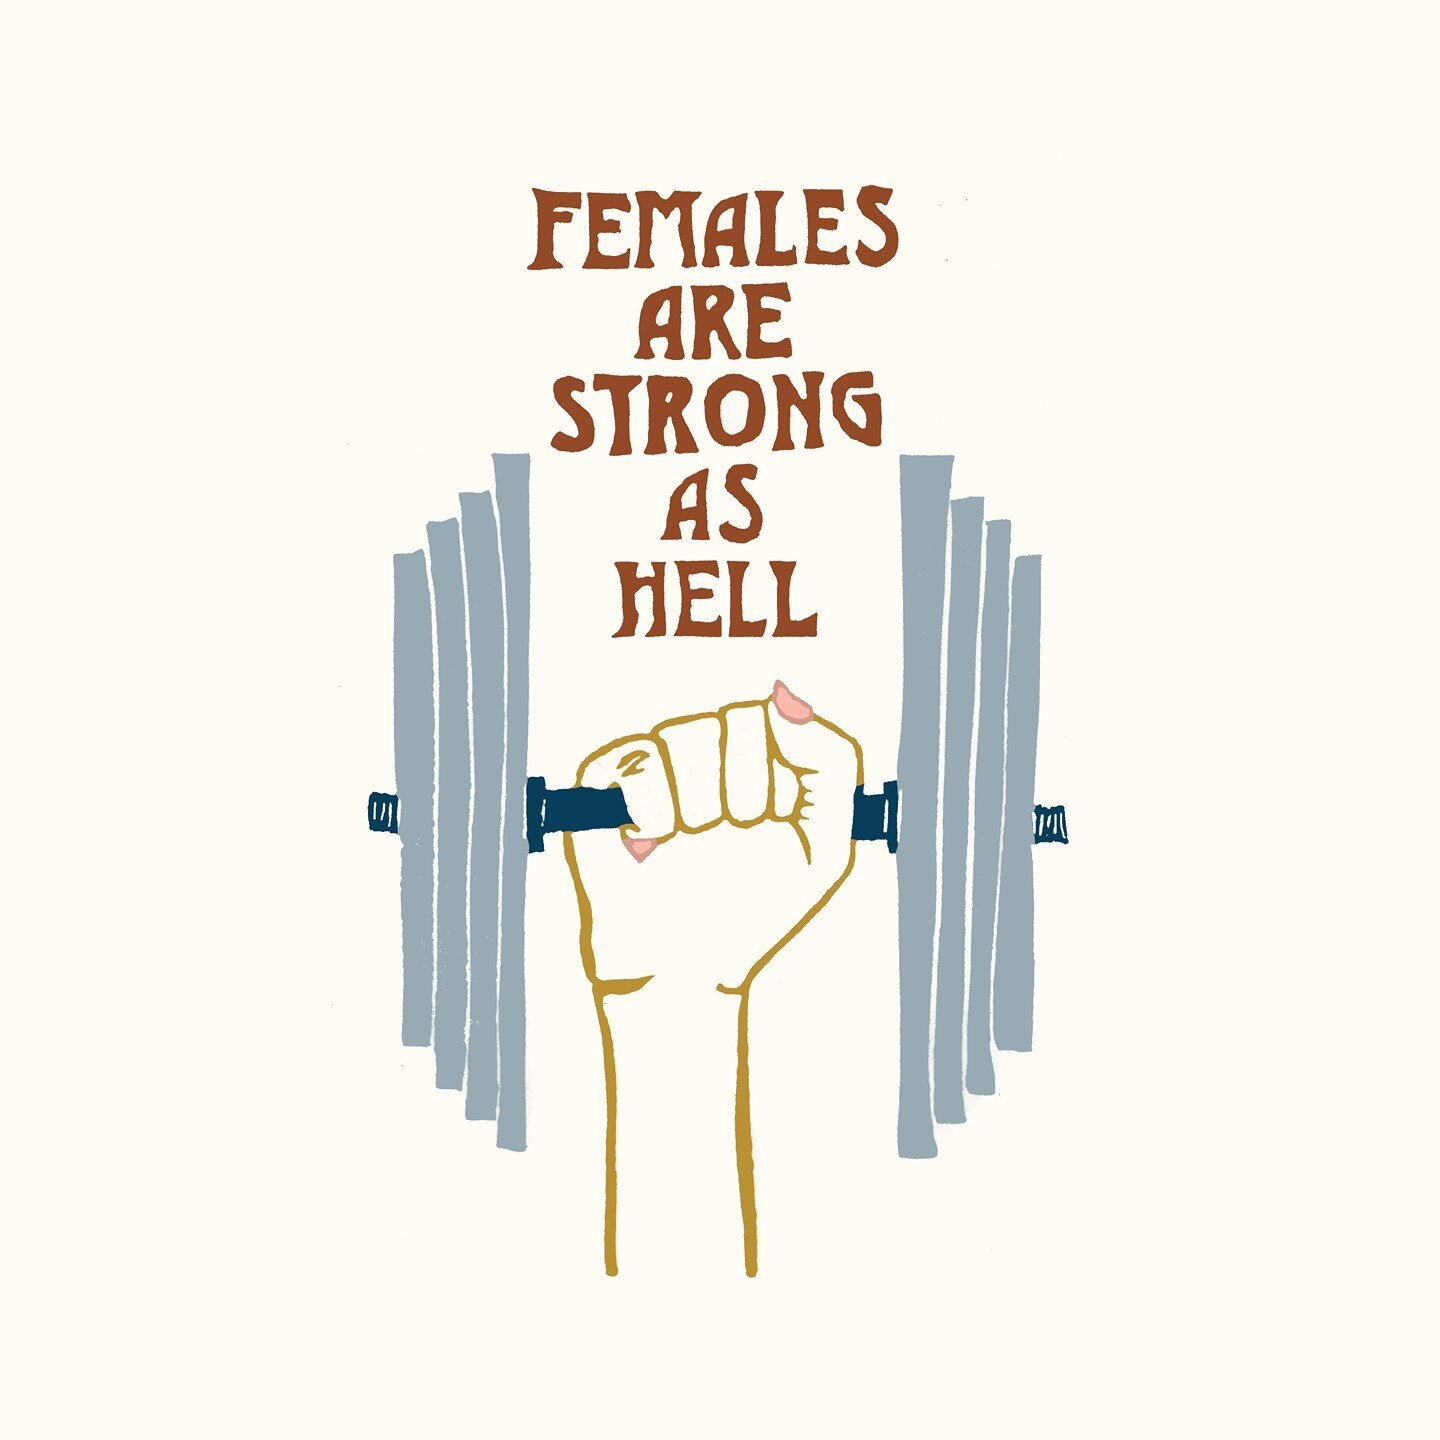 Stand up with the strong ladies in your life! ✊🏿✊🏾✊🏽✊🏼✊🏻✊
⁠
Share with us some people inspiring you most right now in the comments below. We want our feed full of amazing womxn!
⁠
We'll start with a few we admire:

@mindlovemelissa⁠
@morganharpe